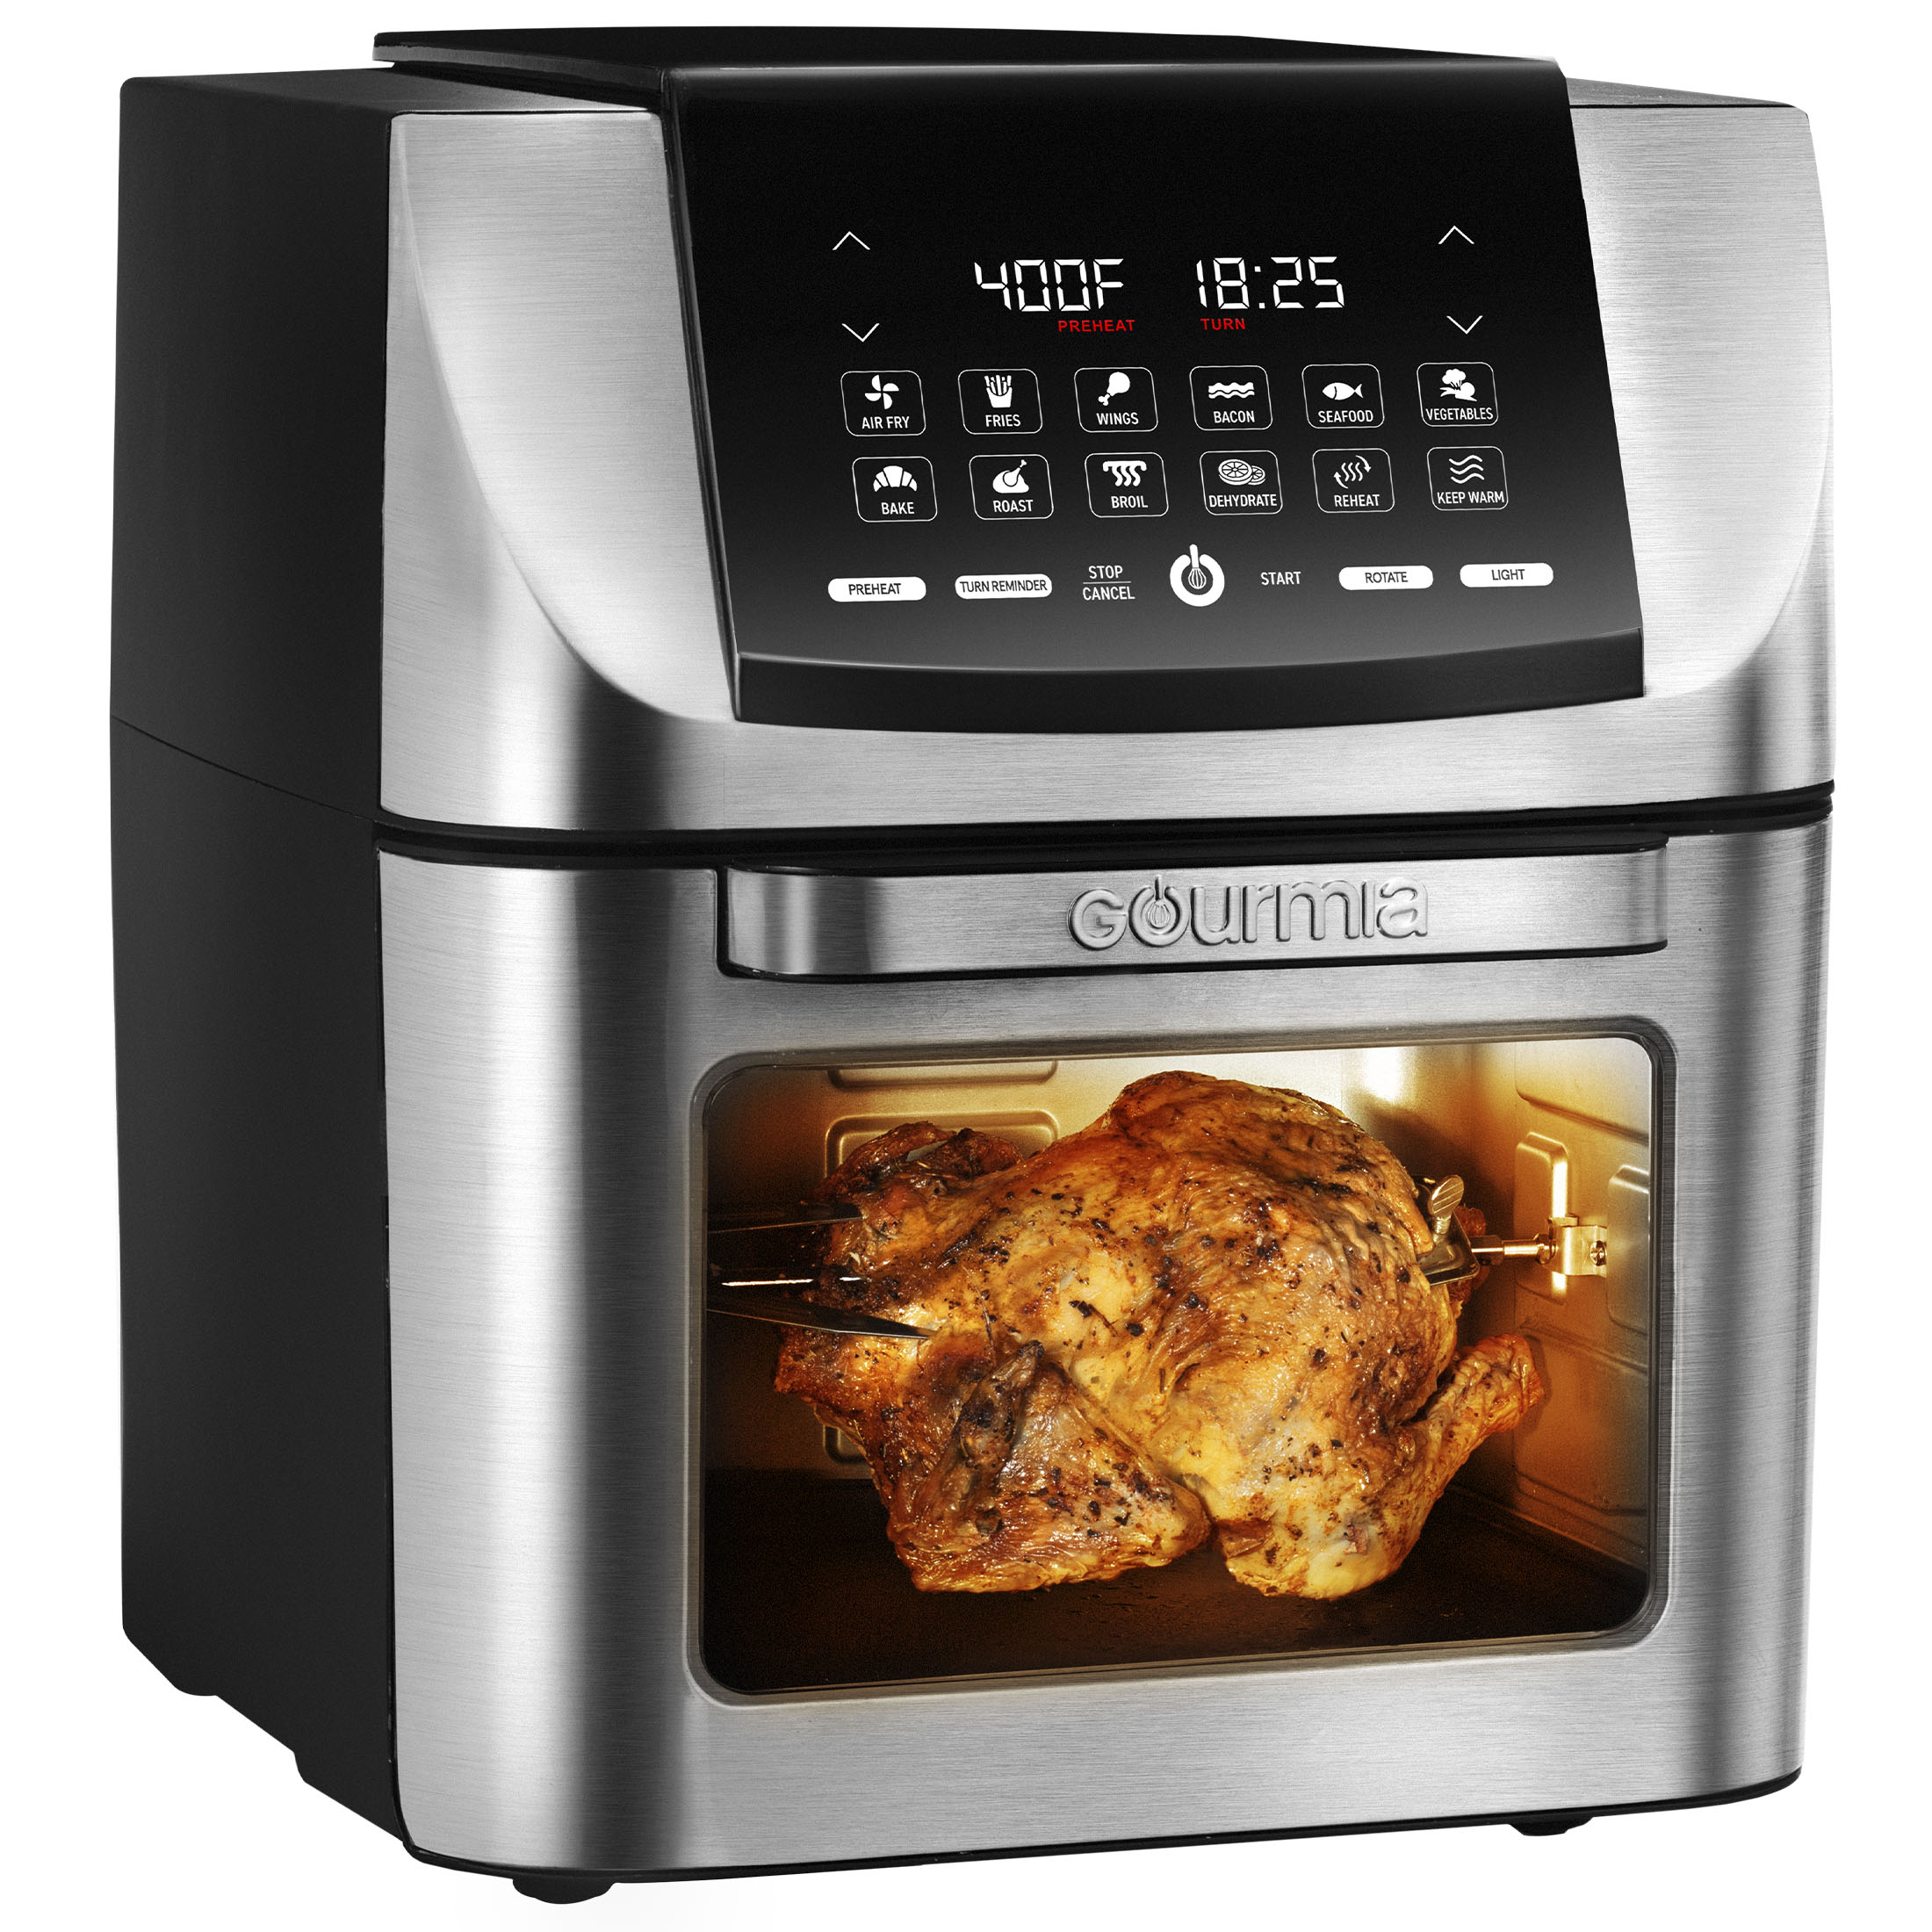 Gourmia All-in-One 14 QT Air Fryer, Oven, Rotisserie, Dehydrator with 12 Cooking Functions - image 3 of 6